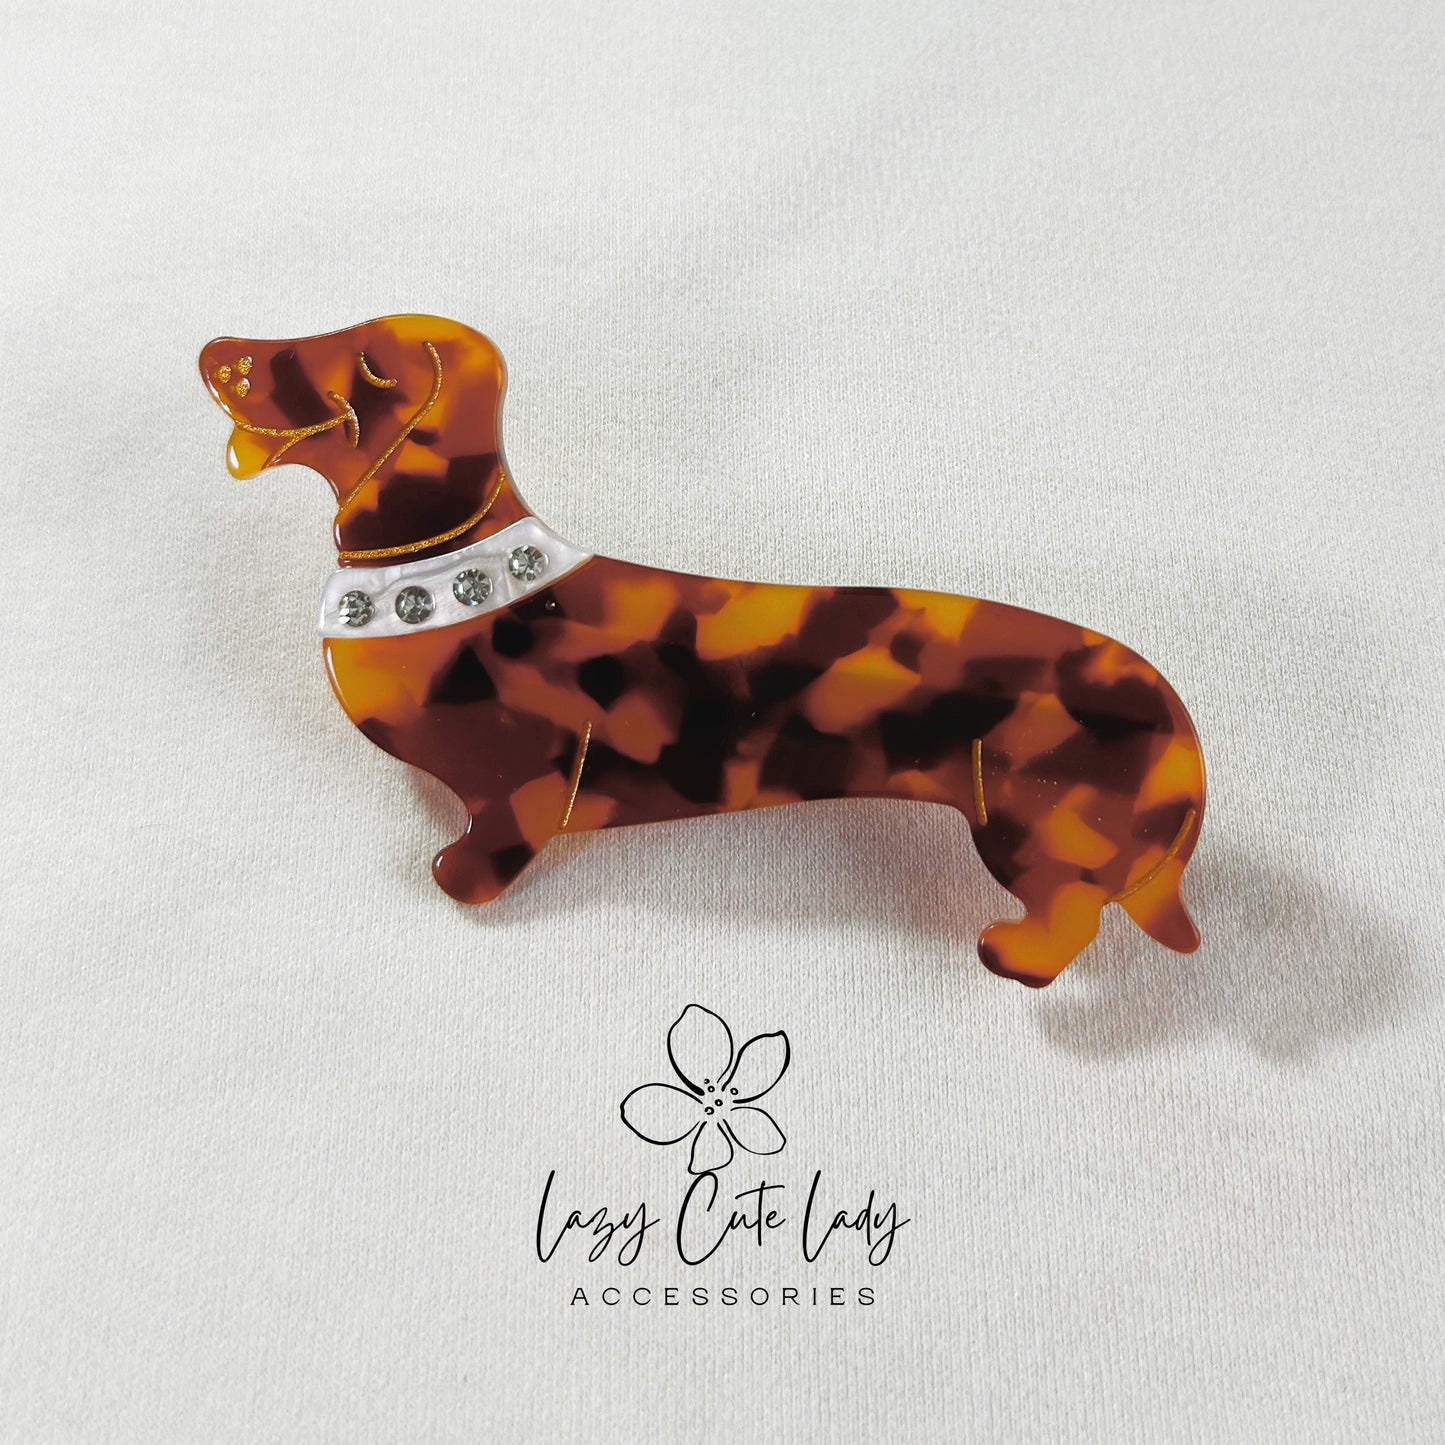 Adorable Dachshund-Shaped Hair Clip – Fashionable and Playful Accessory